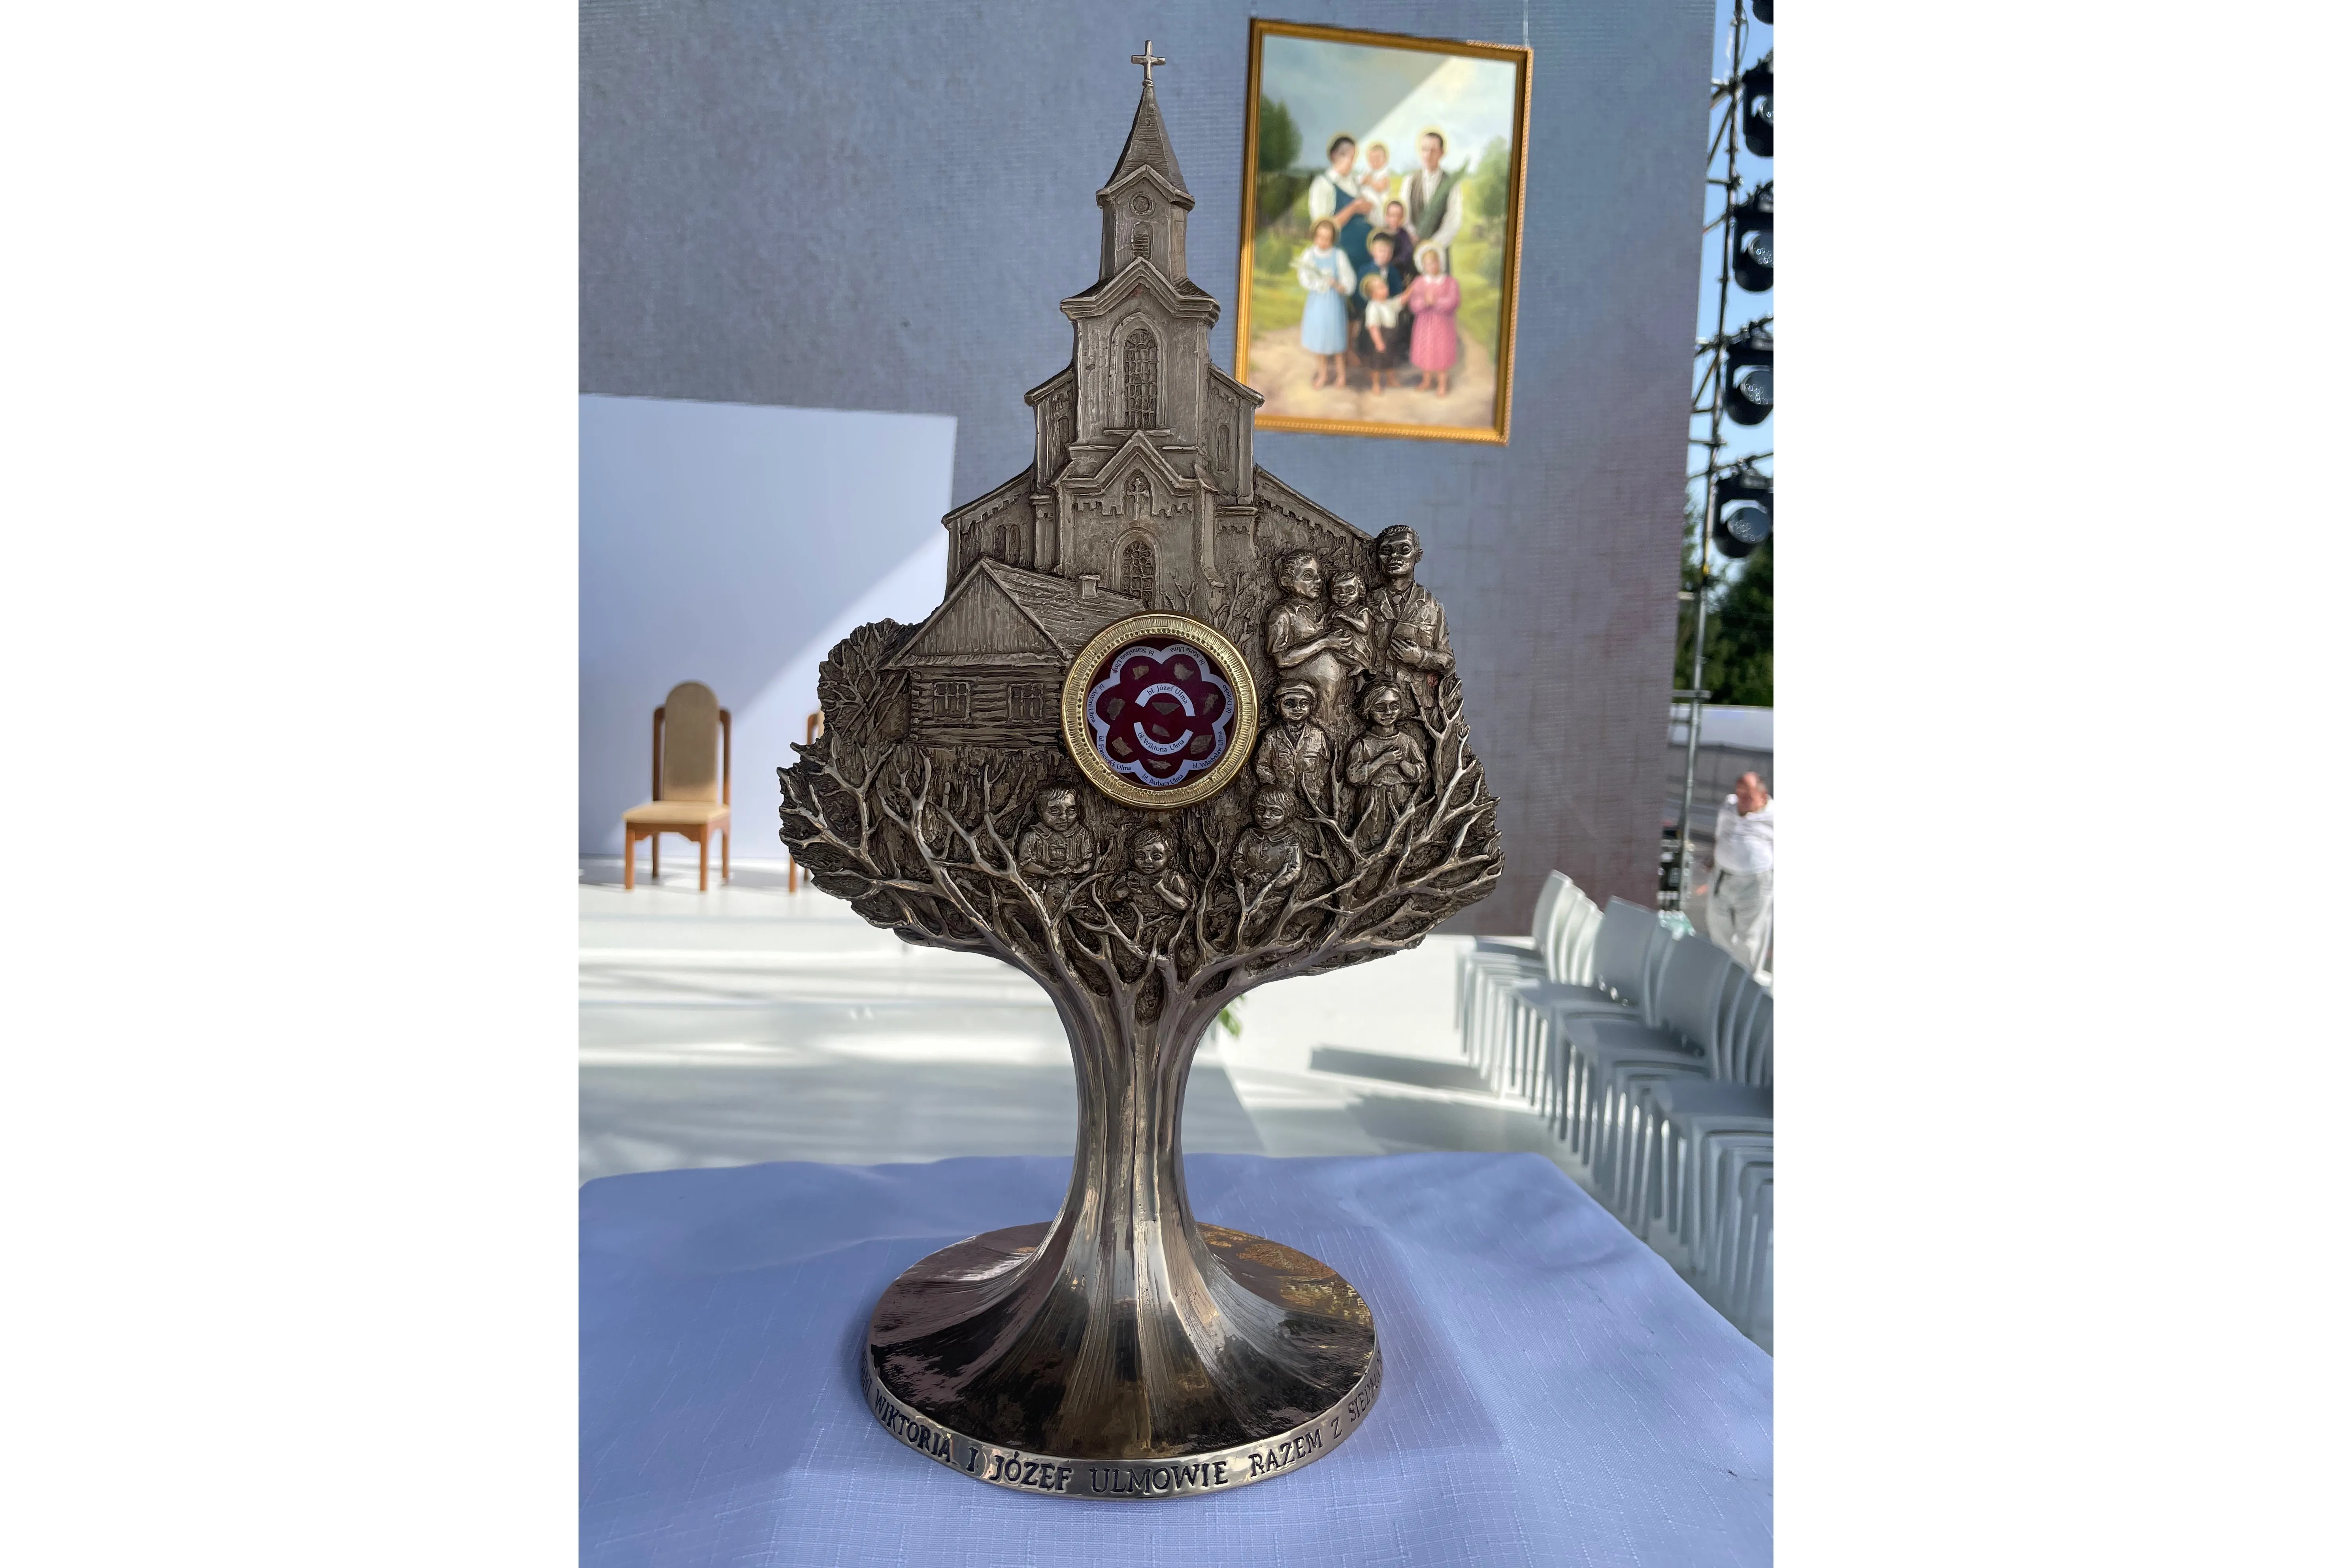 A reliquary of the Ulma family that was brought up as part of the beatification rite, with the family's official image in the background. Credit: Courtesy of Father Michael Niemczak